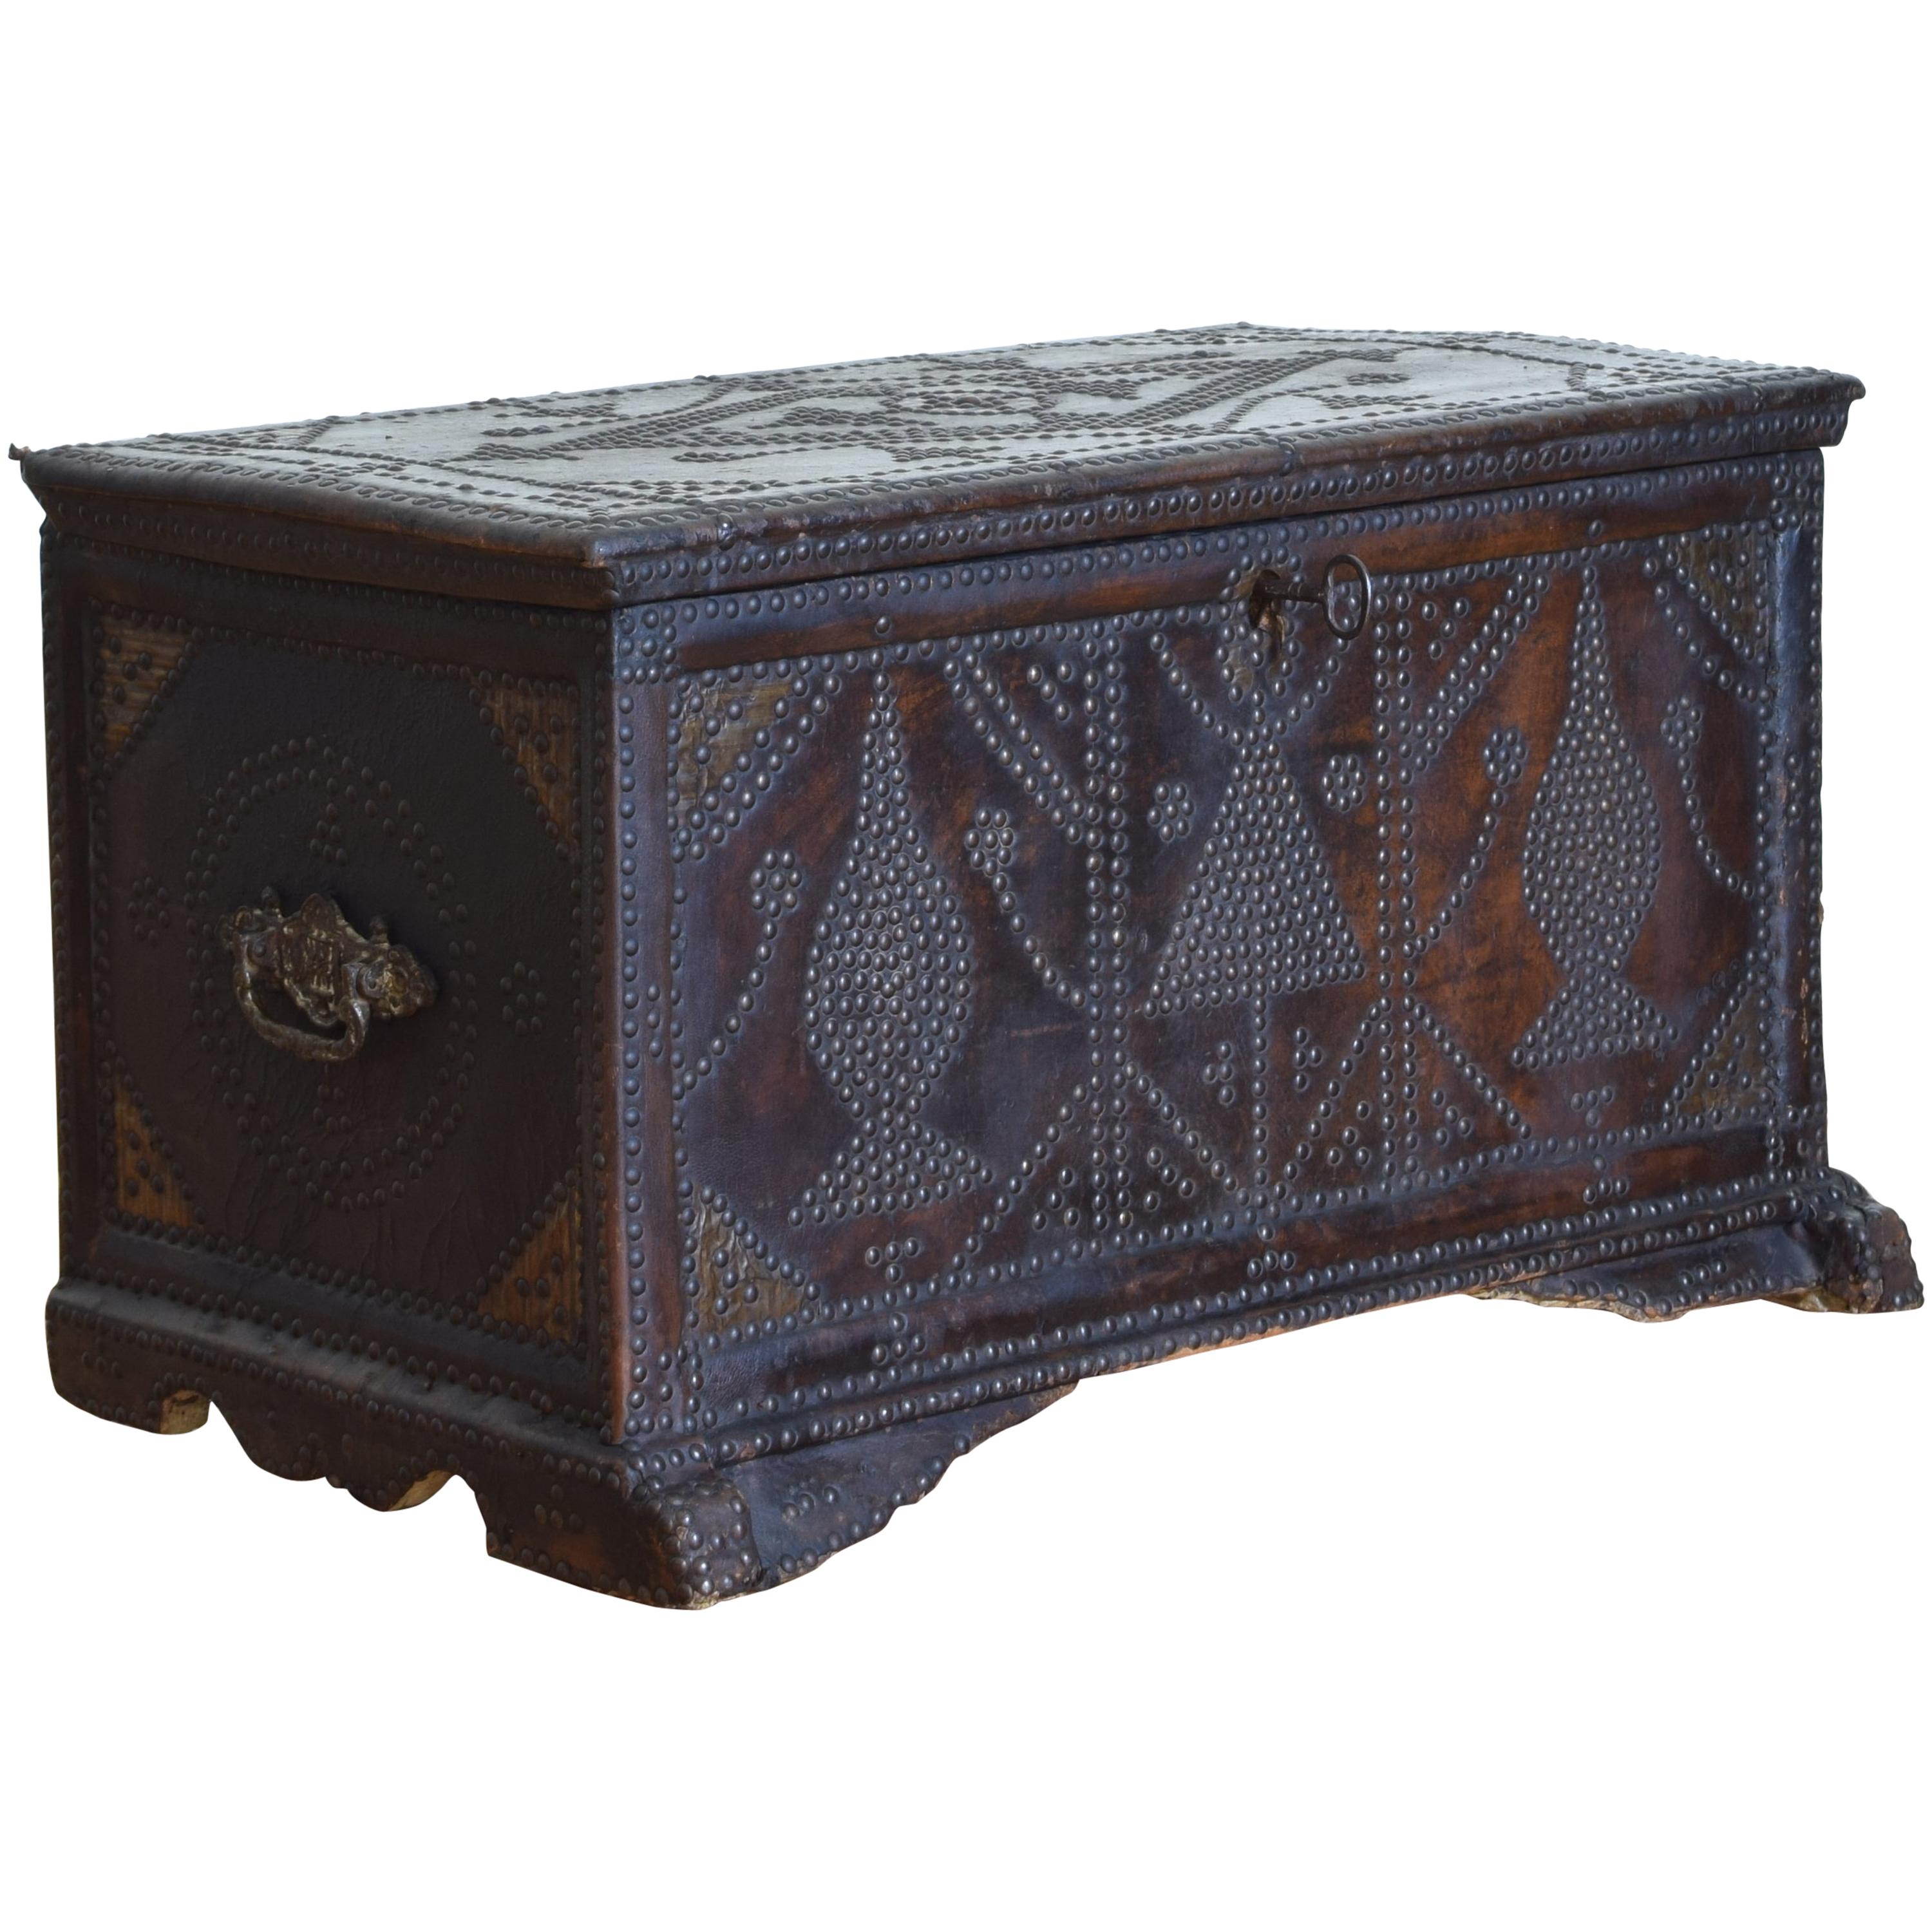 Spanish Baroque Style Leather Covered Trunk with Nailhead Decoration